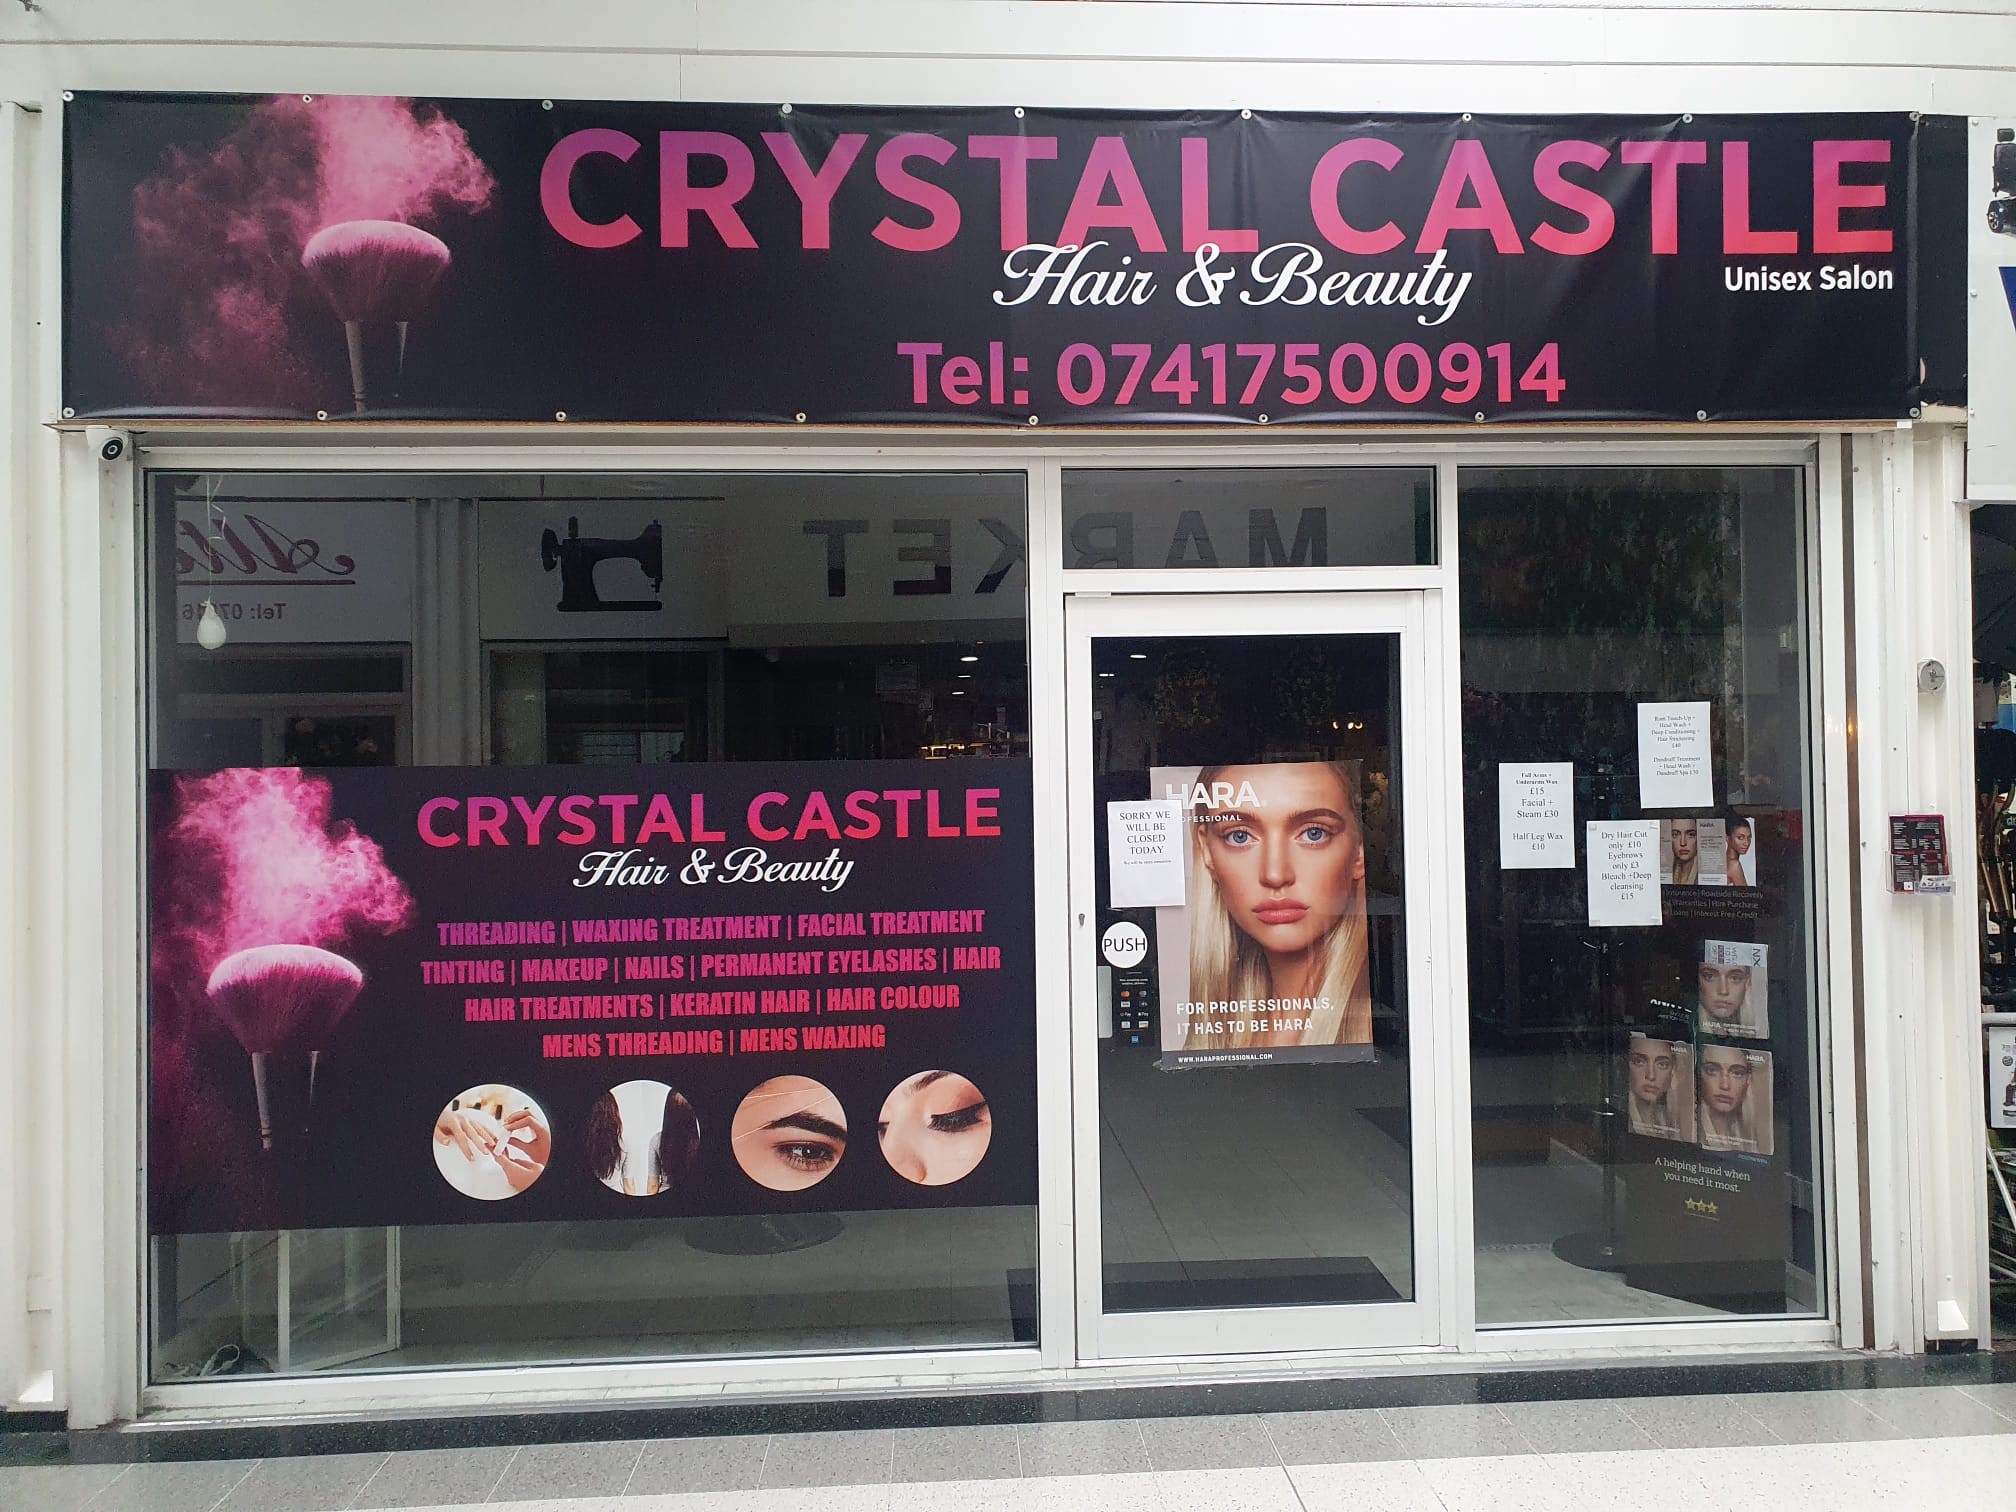 Crystal Castle Kings Square SC will be closed today